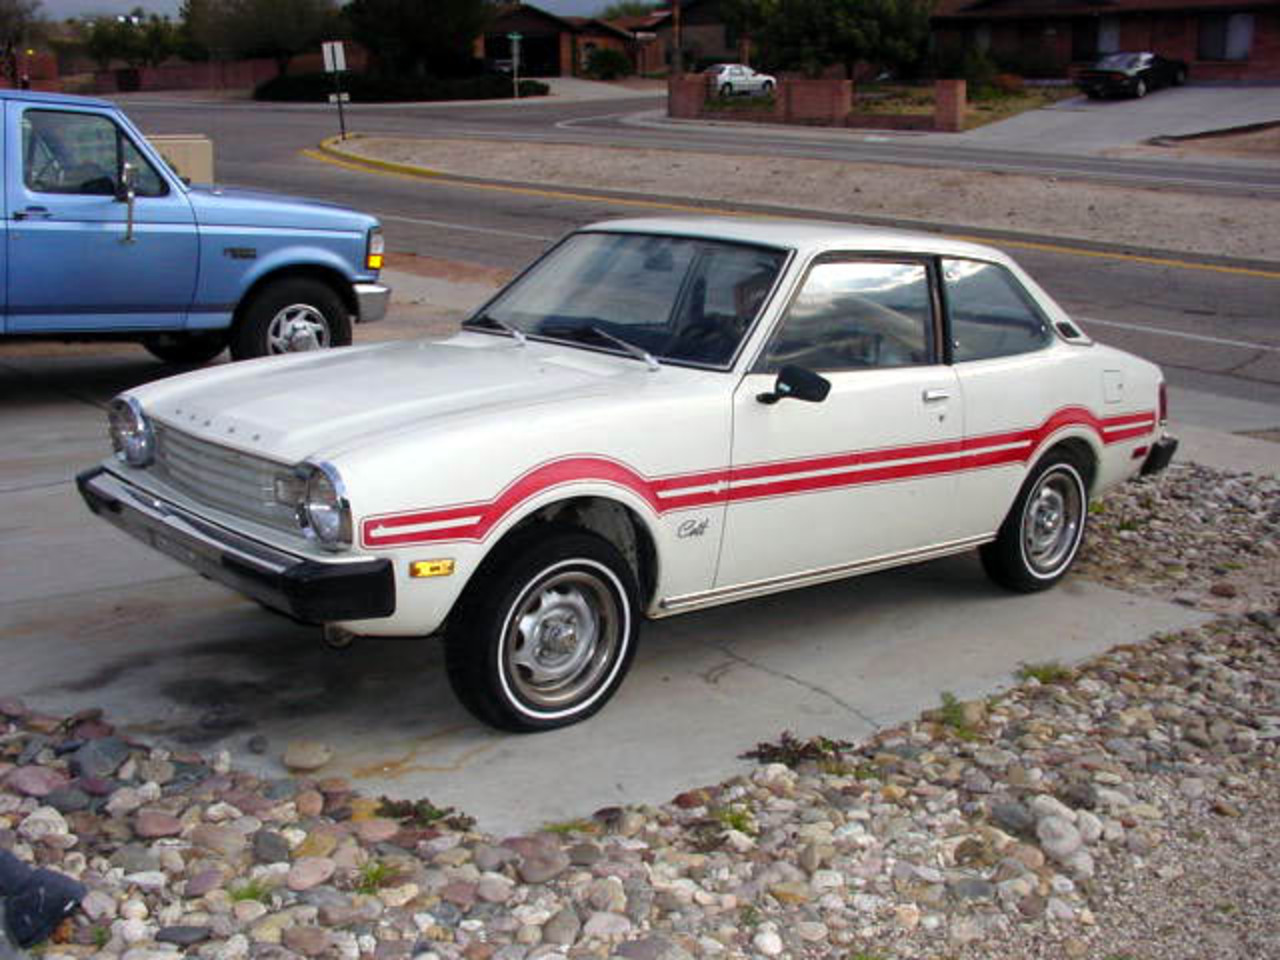 Domingo's 1977 Dodge Colt. It has a 4G32 engine and a 4-speed transmission